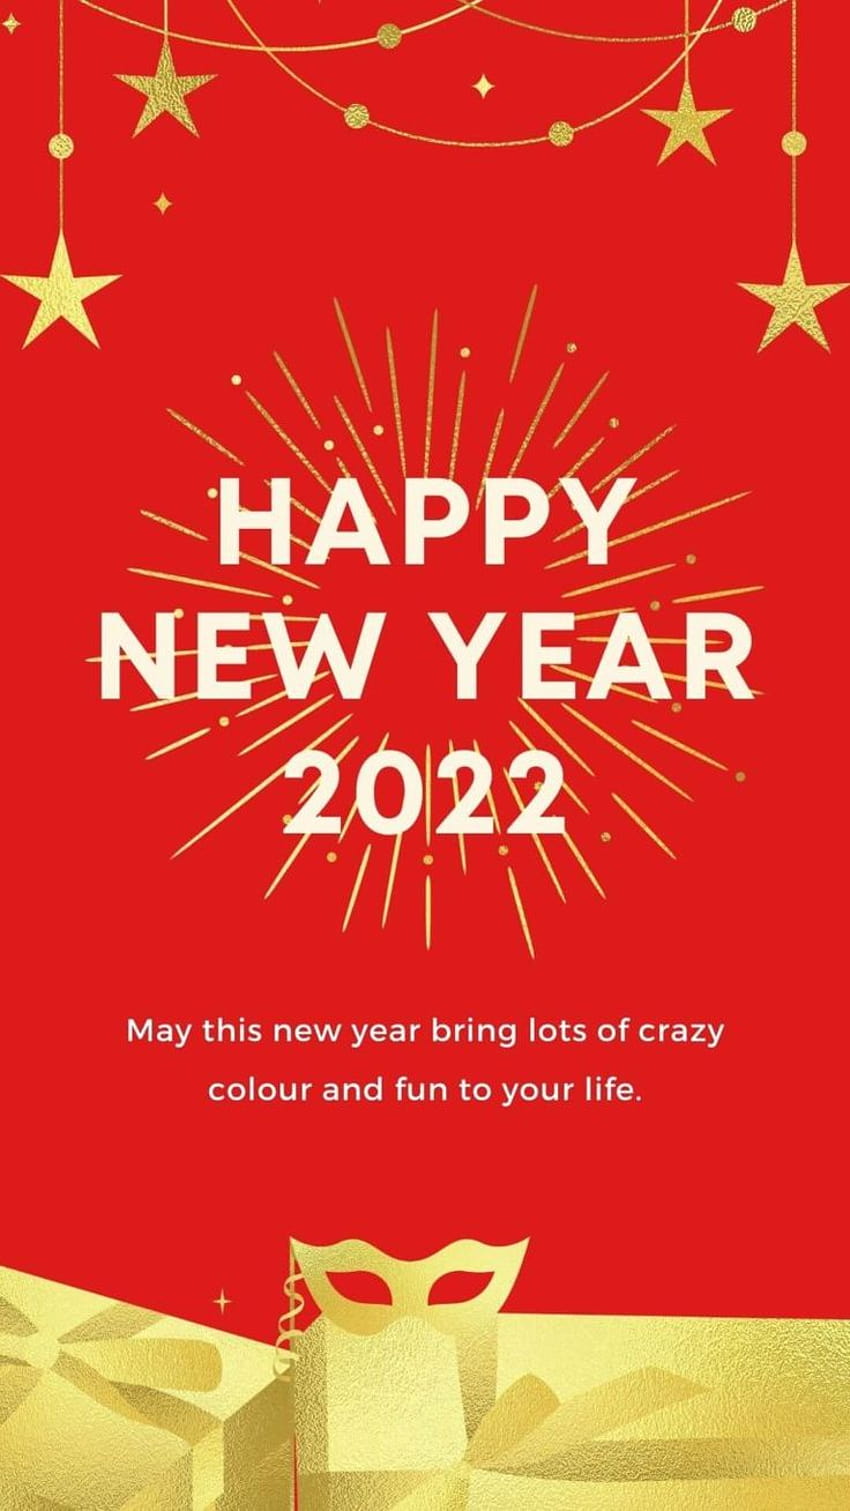 Latest New Year 2023 Wallpapers and Images for iPhone 14 Pro and iPads   Quotes Square  Happy new year wishes Iphone wallpaper winter Newyear